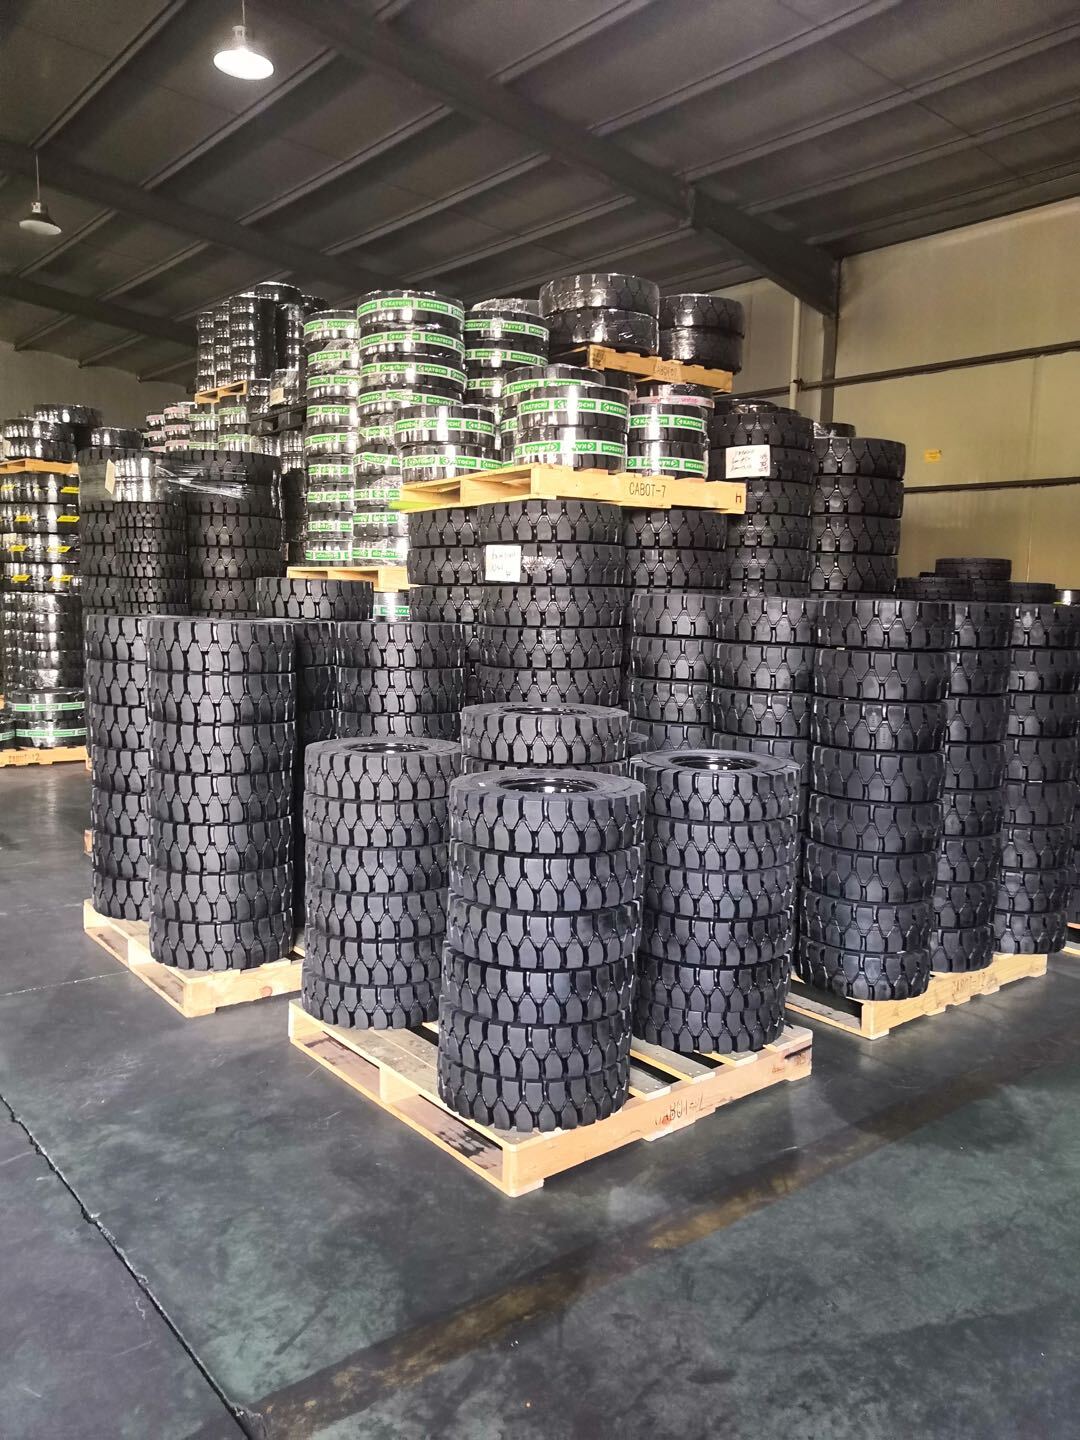 28*9-15 solid tyre for forklift with good quality for hot sale  